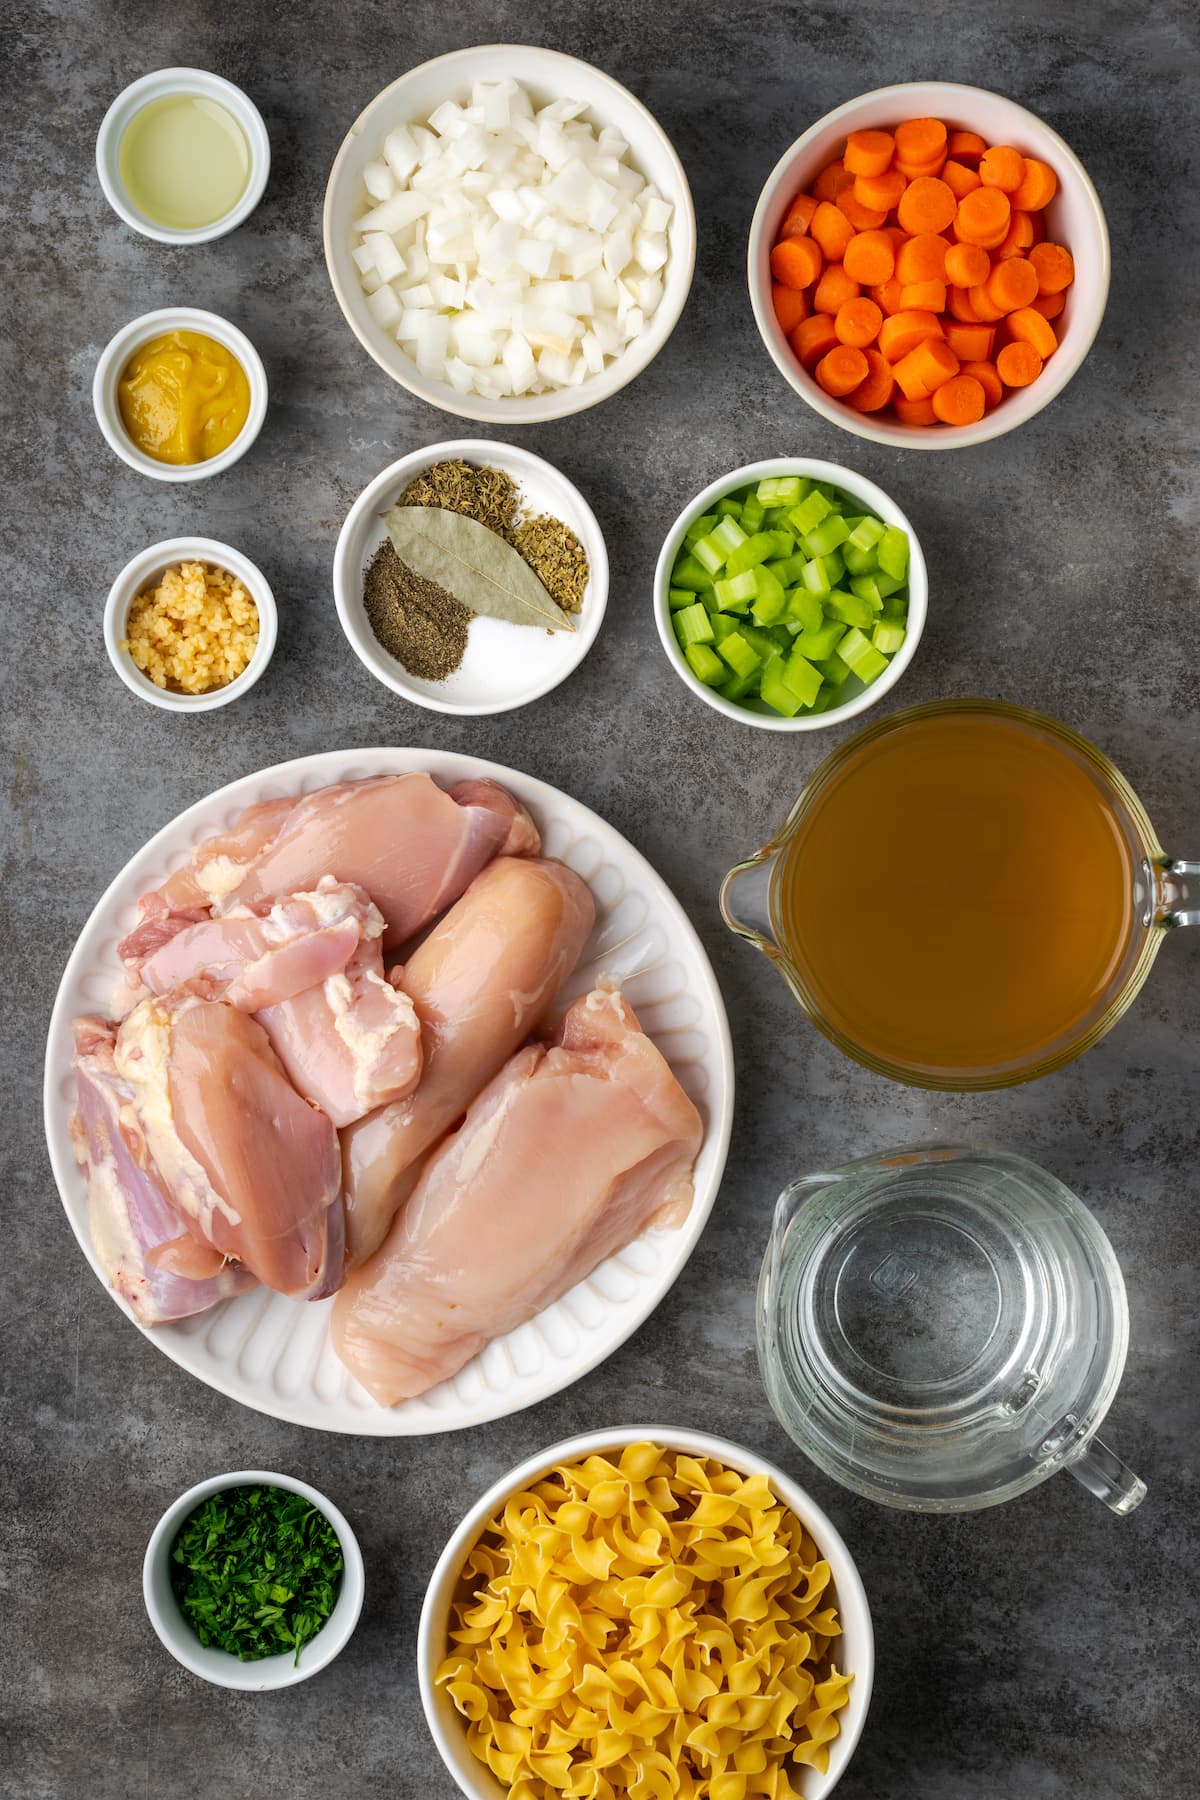 The ingredients for Instant Pot chicken noodle soup.